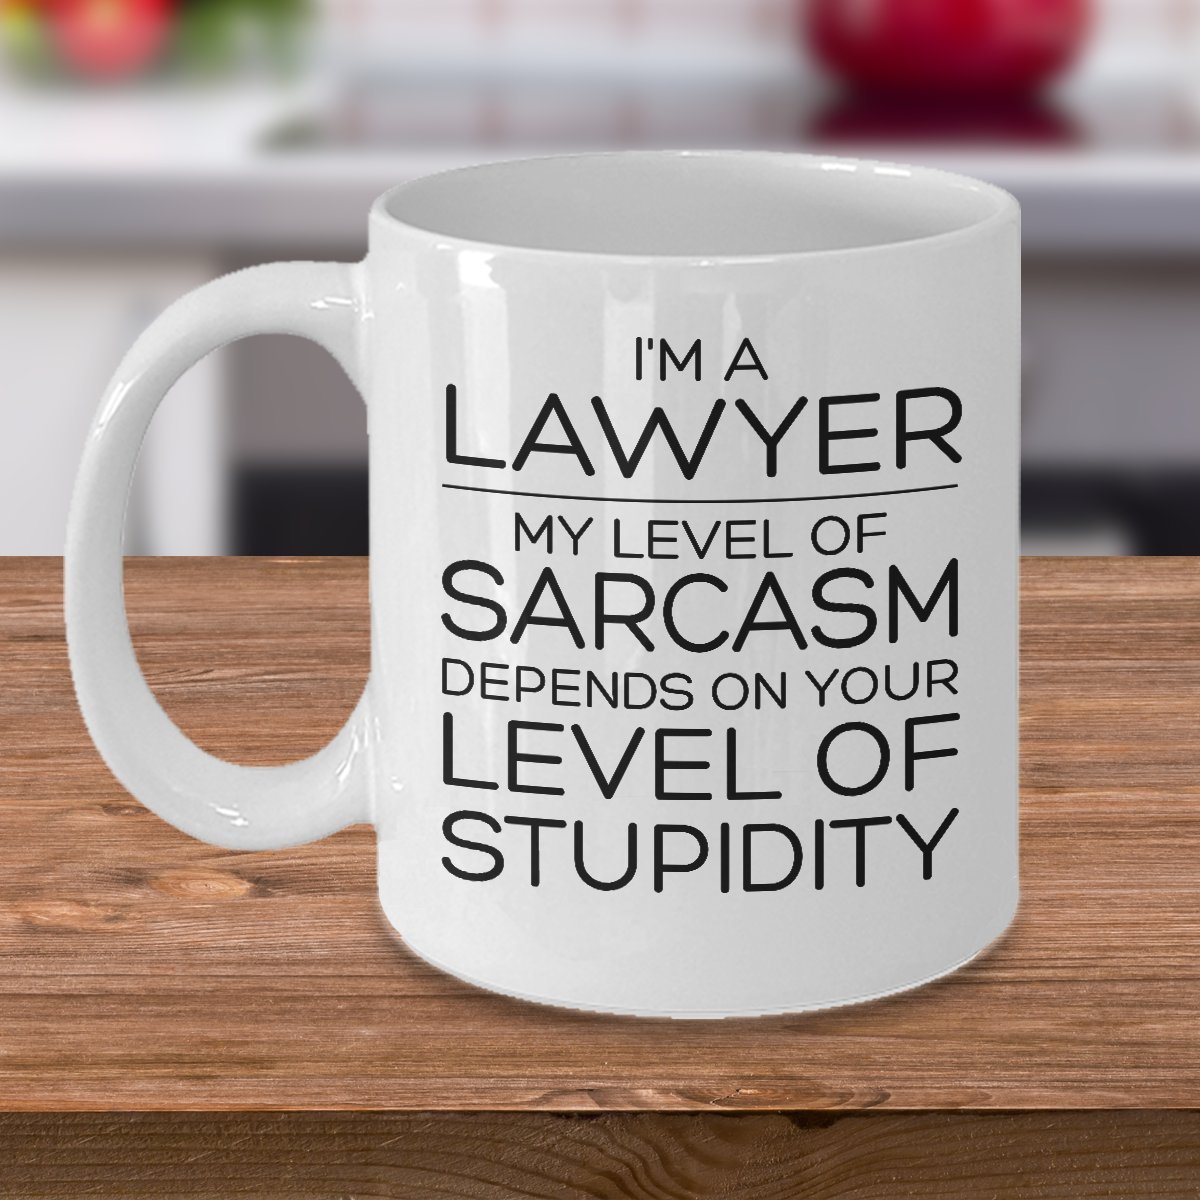 MB10 PROUD GIFTS Funny Lawyer Coffee Mug, I'm A Lawyer Sarcasm Novelty Cup, Lawyer Gifts For Women Men, Best Future New Attorney Mug, Unique Graduation Birthday Christmas Gifts For Lawyer